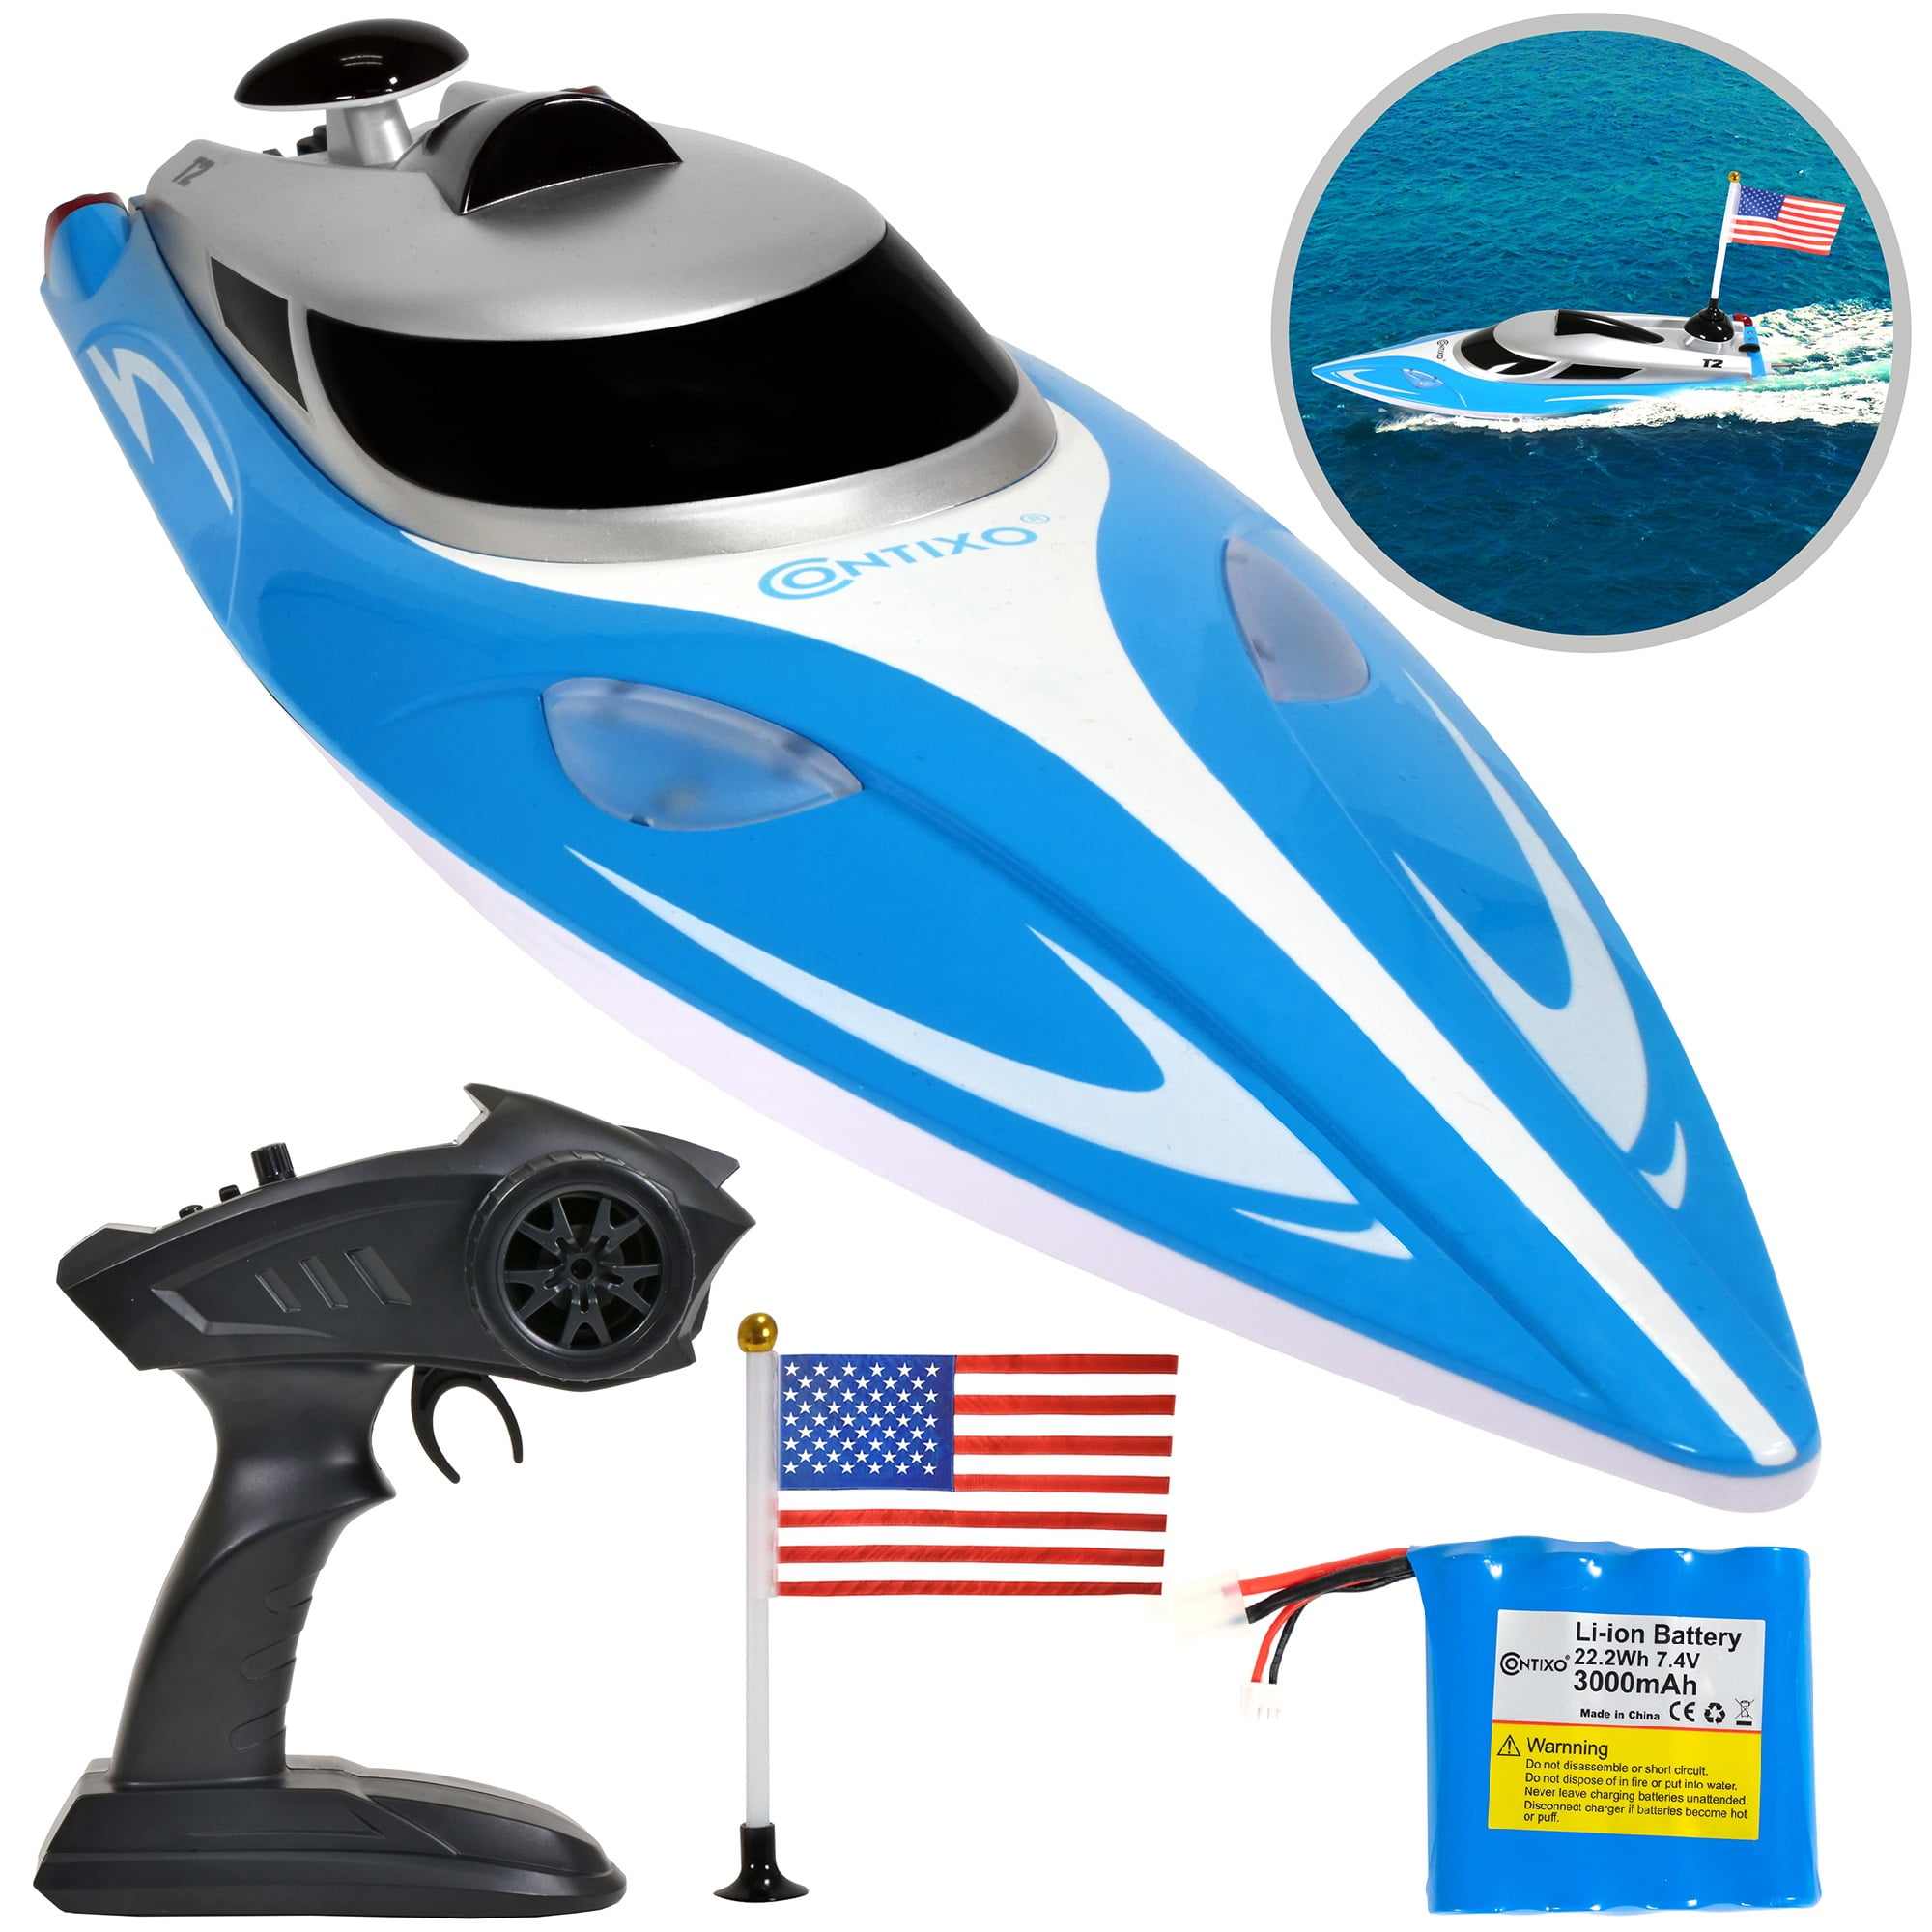 Details about   Contixo T2 RC Remote Control Racing Sport Boat SpeedboatSwimming Pool Toy